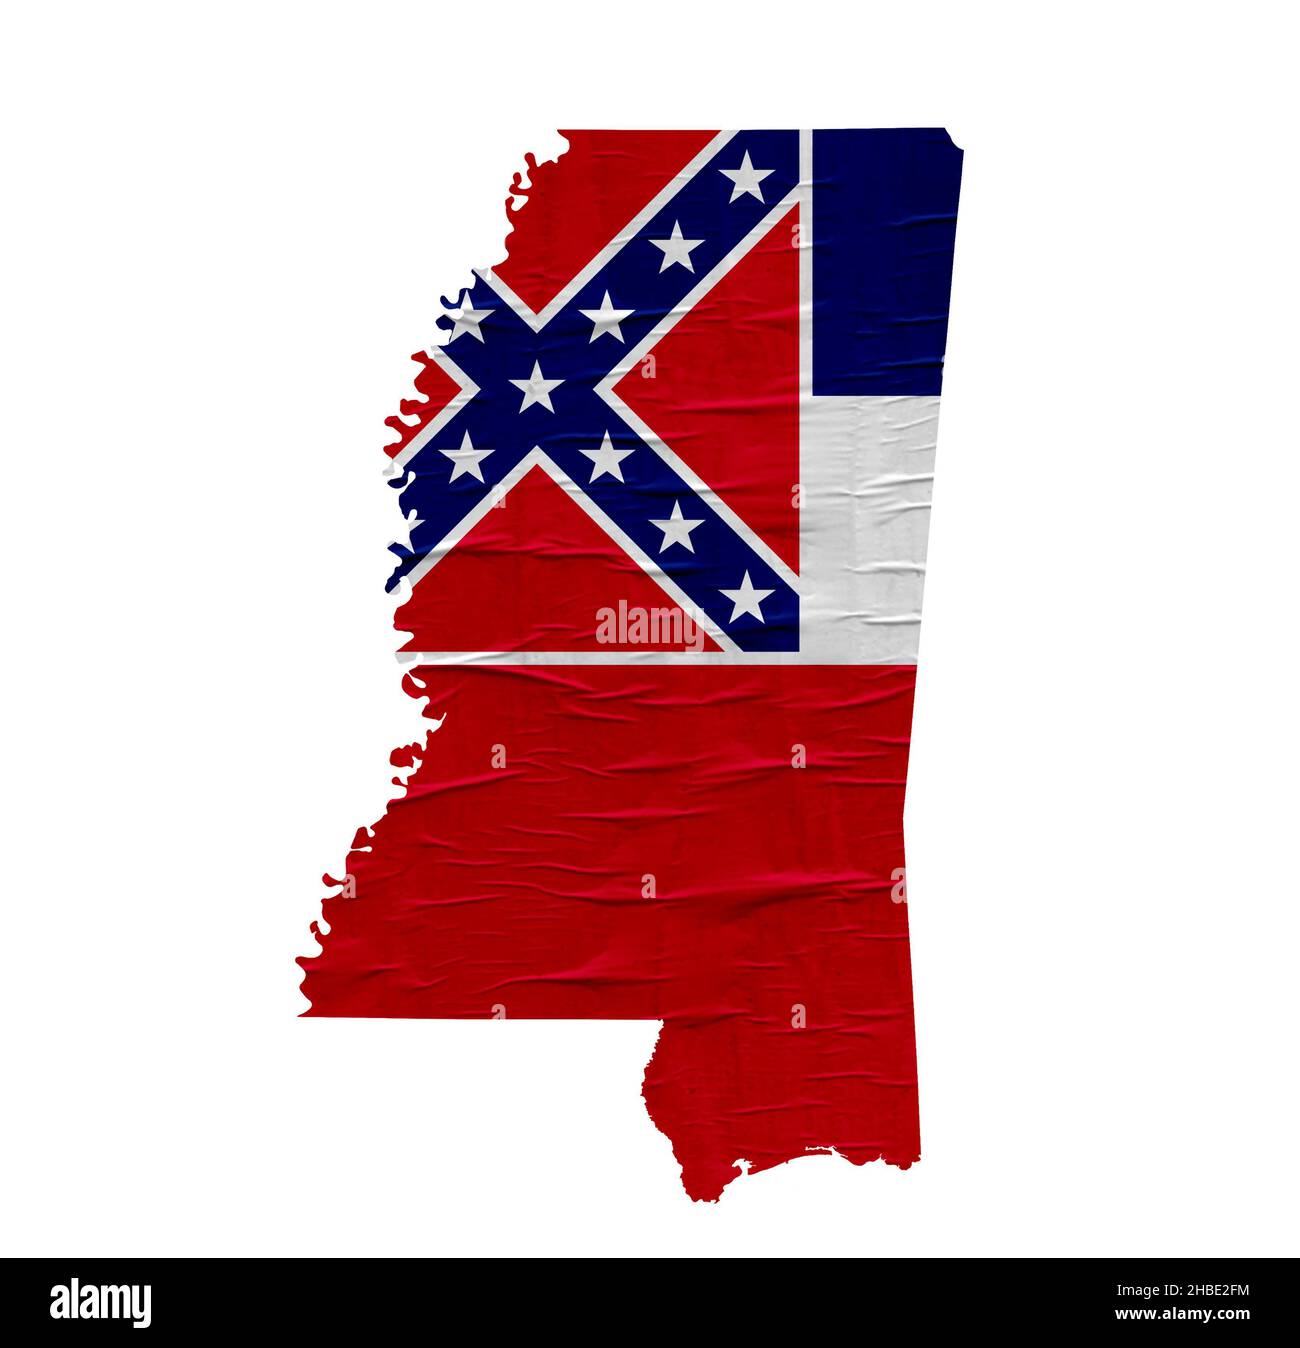 US State Mississippi map with flag Stock Photo